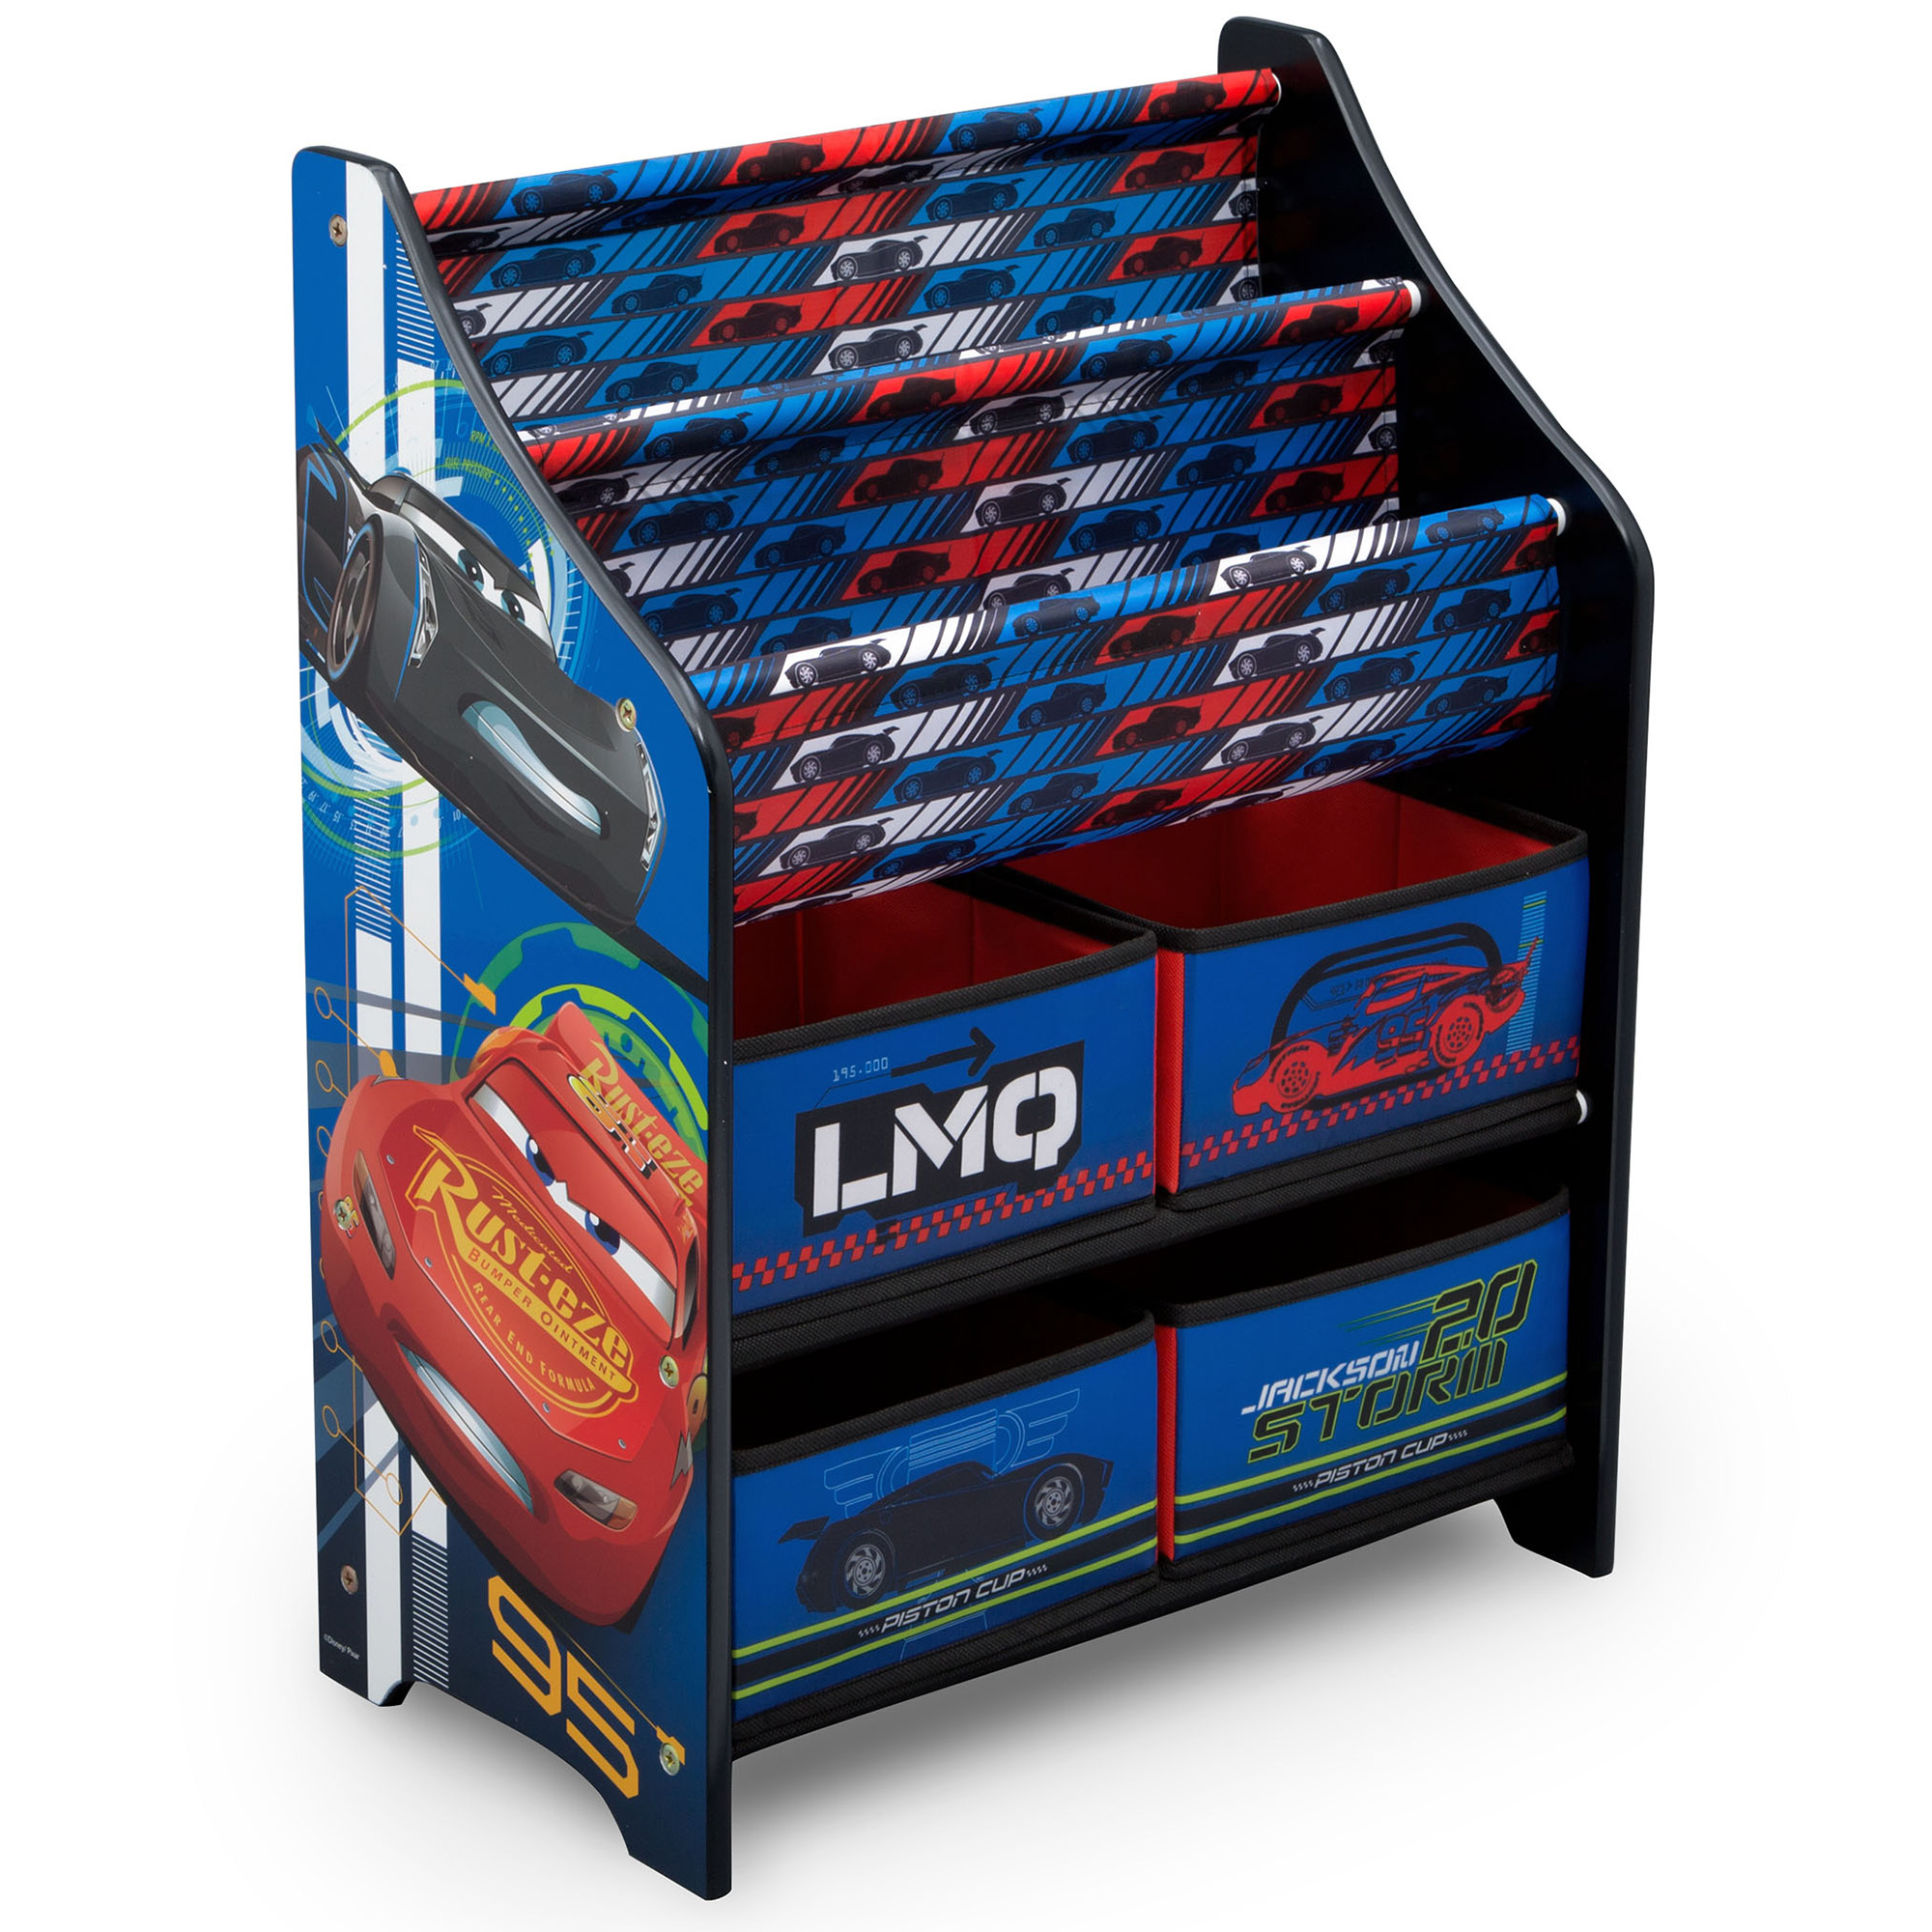 Disney/Pixar Cars Book and Toy Organizer for Kids/Toddlers by Delta Children, Greenguard Gold Certified - image 4 of 5